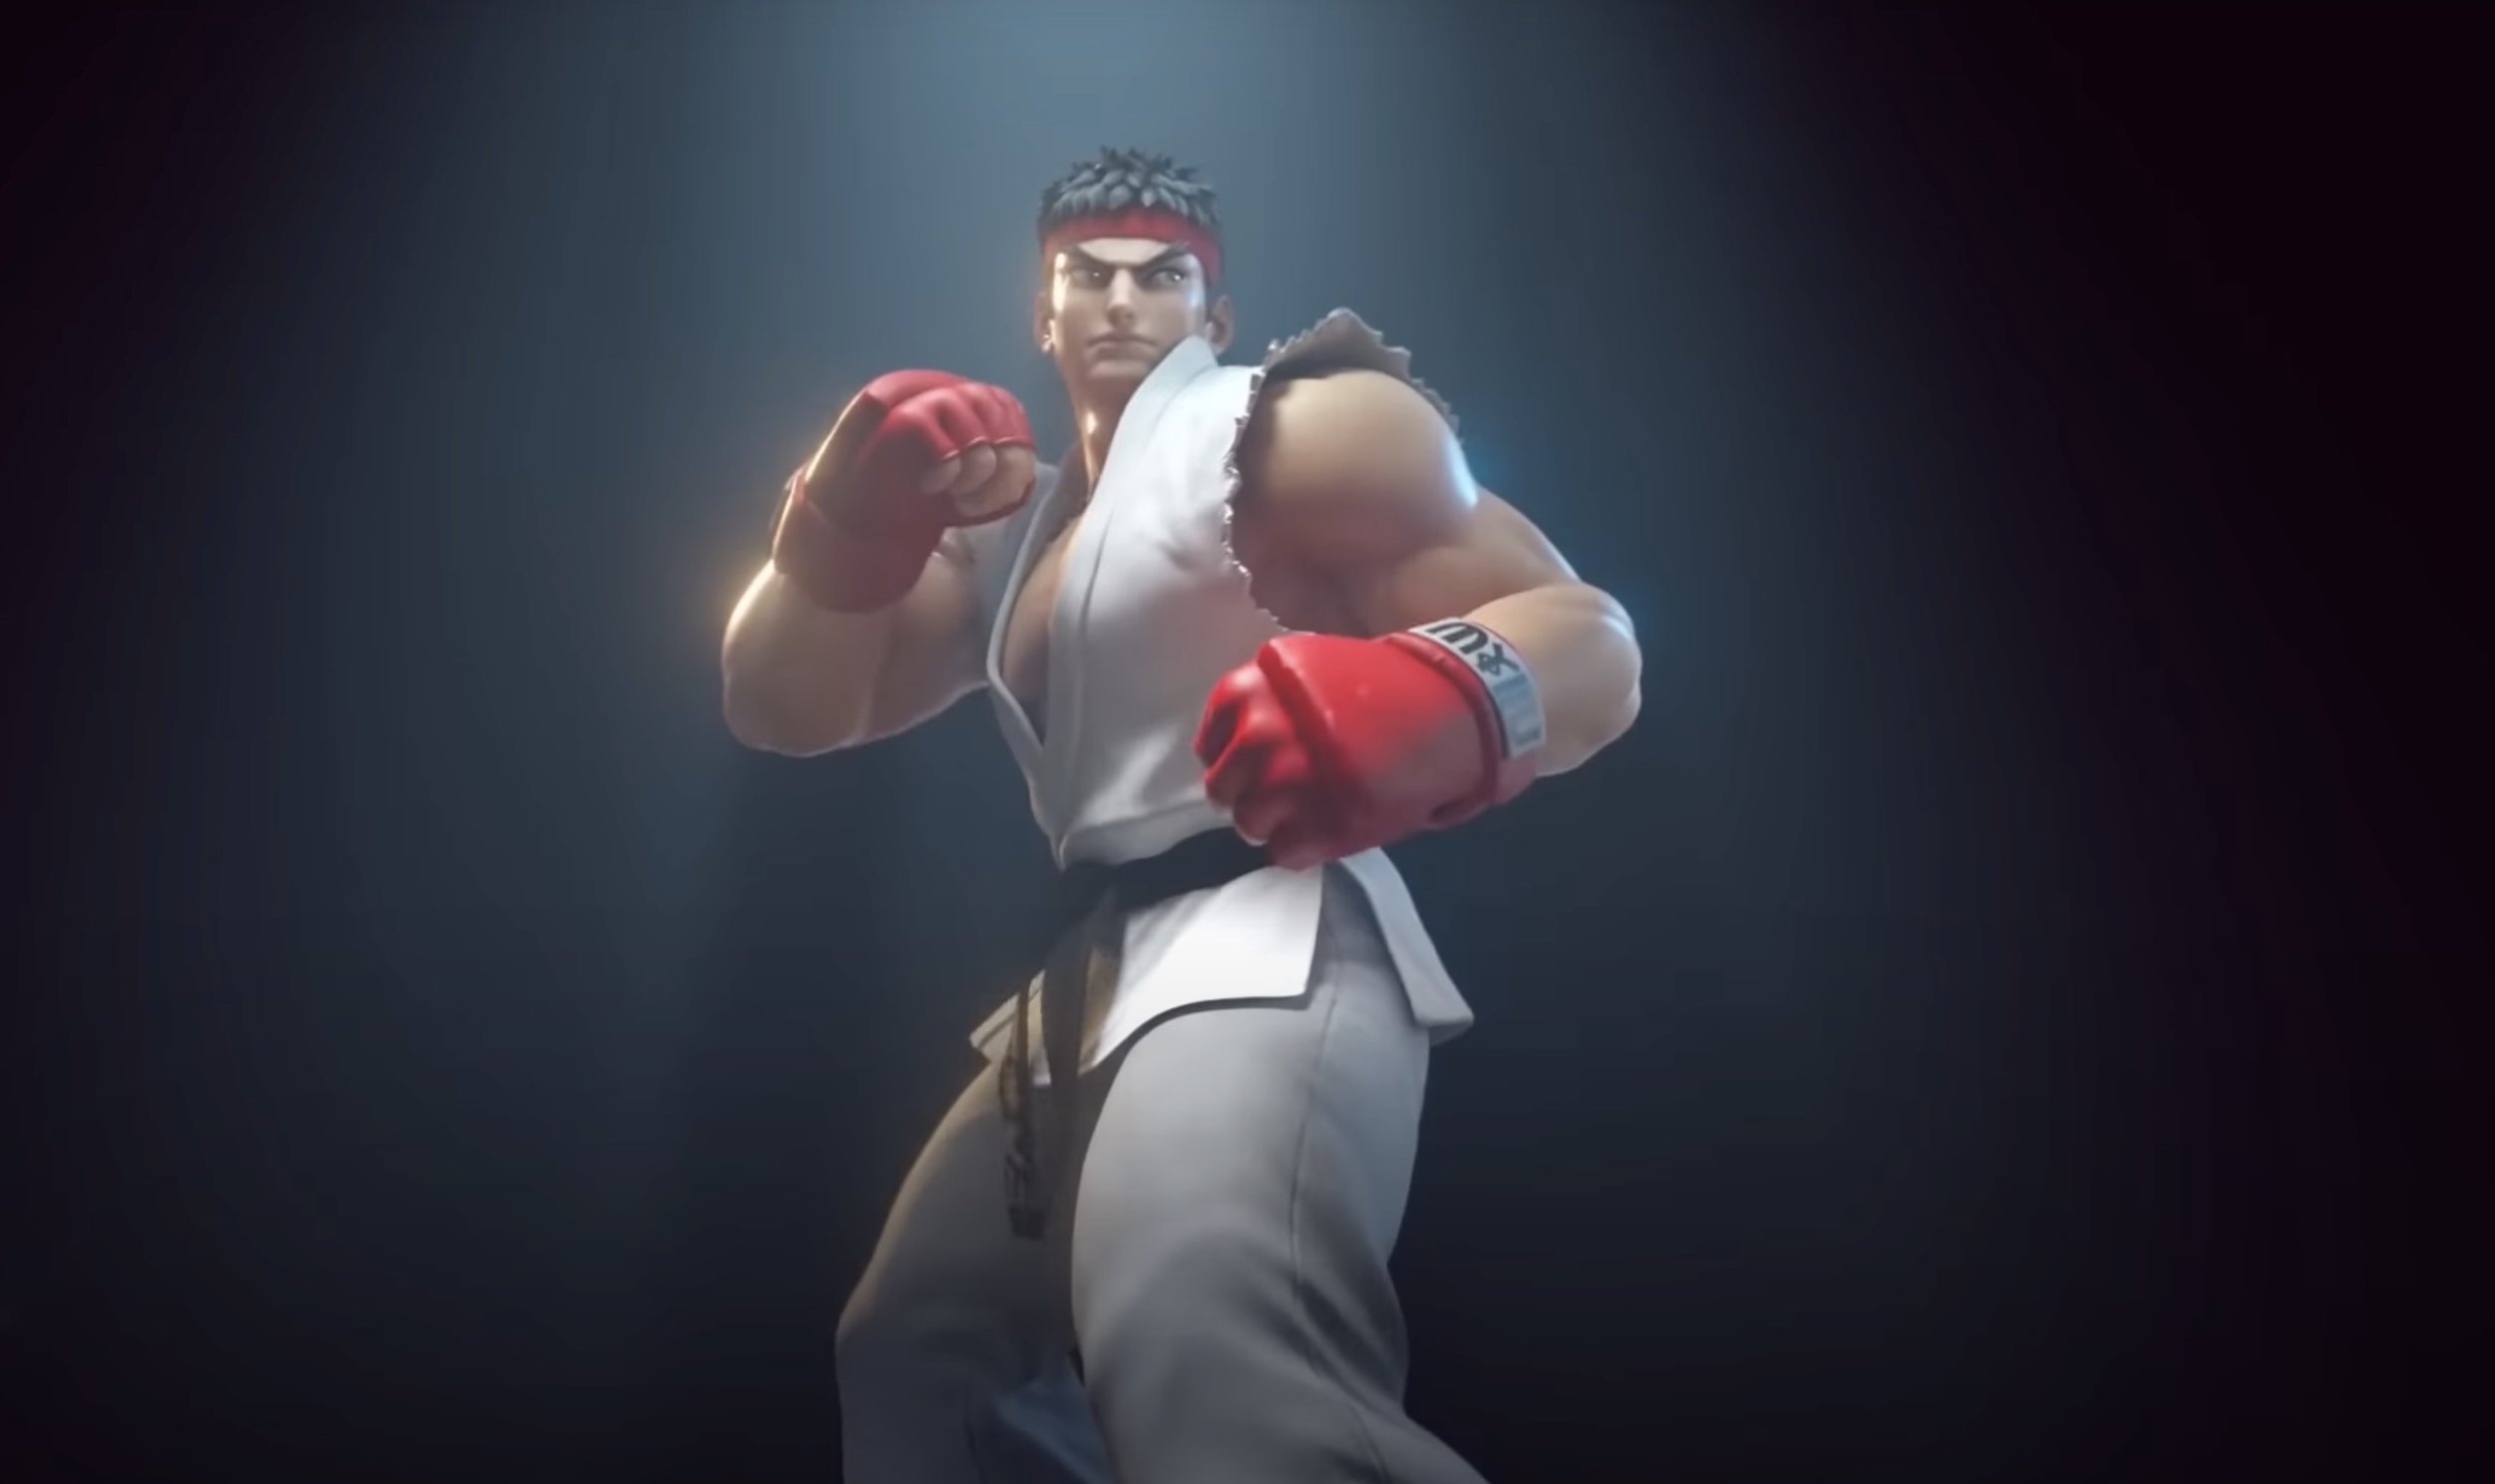 It's Your Turn to Get Into the Ring as Street Fighter: Duel Was Announced